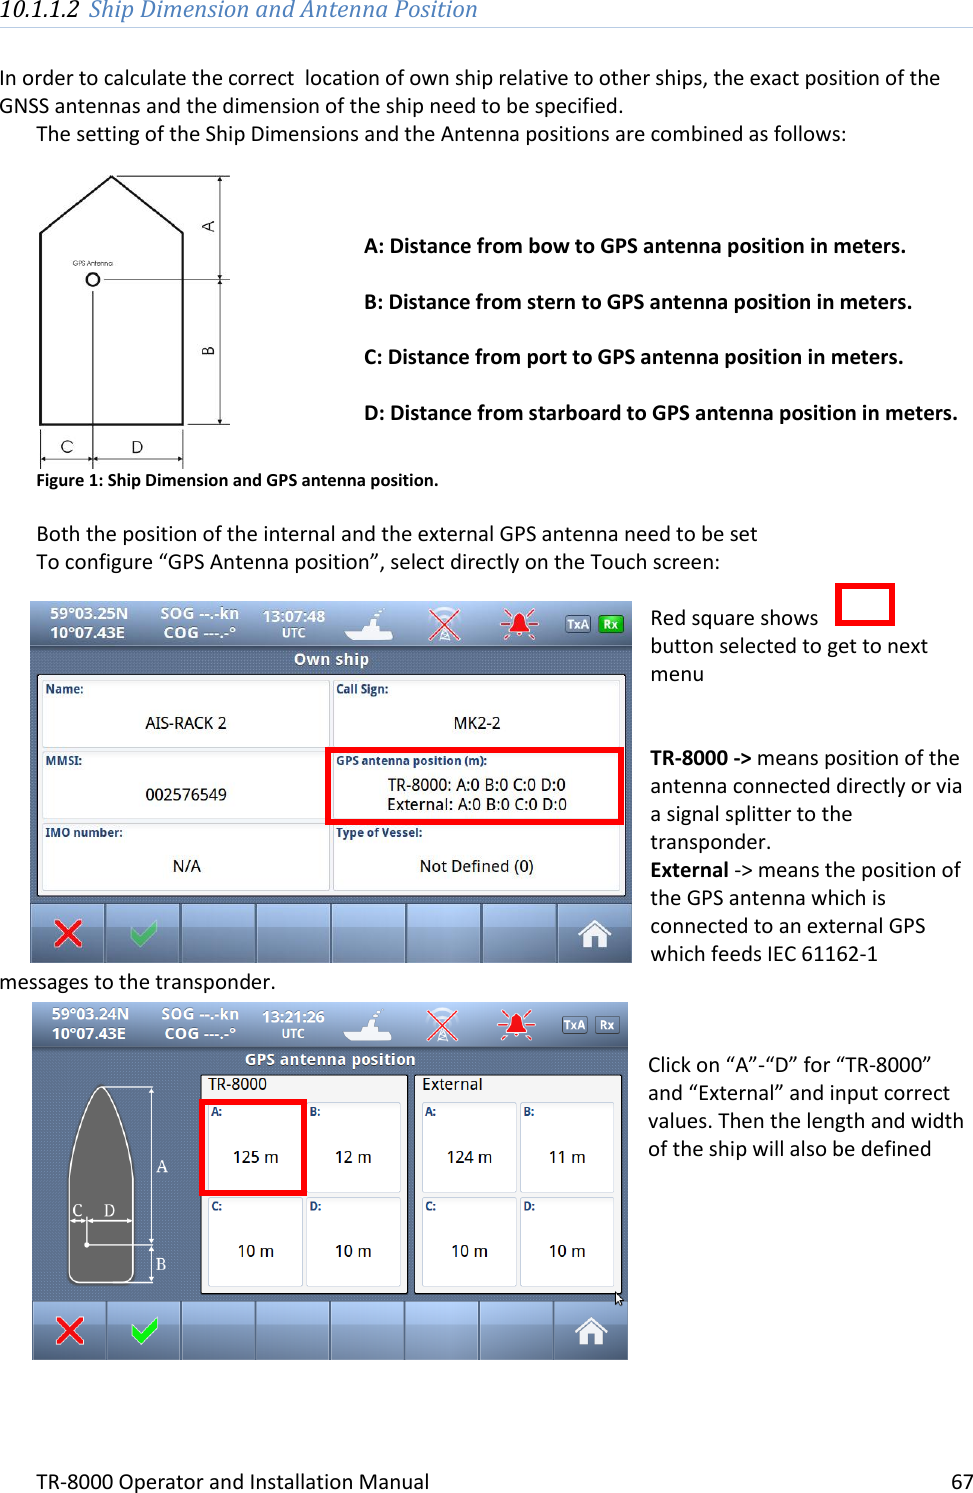 TR-8000 Operator and Installation Manual    67  10.1.1.2 Ship Dimension and Antenna Position  In order to calculate the correct  location of own ship relative to other ships, the exact position of the GNSS antennas and the dimension of the ship need to be specified.  The setting of the Ship Dimensions and the Antenna positions are combined as follows:   Figure 1: Ship Dimension and GPS antenna position.  Both the position of the internal and the external GPS antenna need to be set To configure “GPS Antenna position”, select directly on the Touch screen:  Red square shows  button selected to get to next menu   TR-8000 -&gt; means position of the antenna connected directly or via a signal splitter to the transponder. External -&gt; means the position of the GPS antenna which is connected to an external GPS which feeds IEC 61162-1 messages to the transponder.    Click on “A”-“D” for “TR-8000” and “External” and input correct values. Then the length and width of the ship will also be defined           A: Distance from bow to GPS antenna position in meters.  B: Distance from stern to GPS antenna position in meters.  C: Distance from port to GPS antenna position in meters.  D: Distance from starboard to GPS antenna position in meters. 